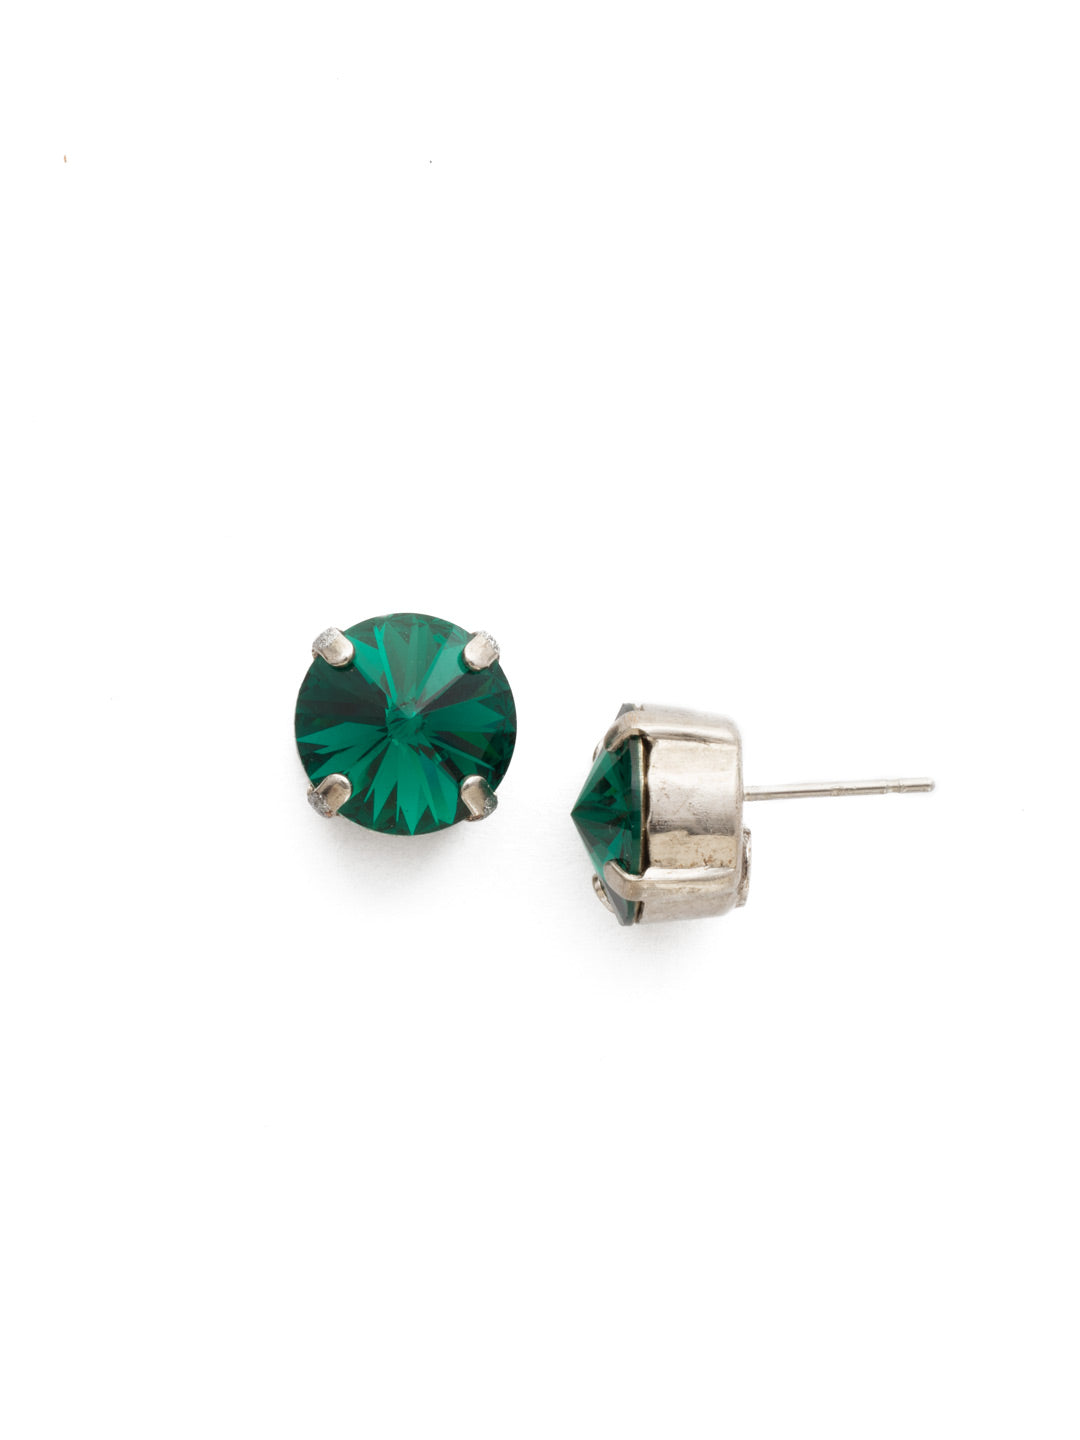 London Stud Earrings - ECM14ASEME - <p>Everyone needs a great pair of studs. Add some classic sparkle to any occasion with these stud earrings. Need help picking a stud? <a href="https://www.sorrelli.com/blogs/sisterhood/round-stud-earrings-101-a-rundown-of-sizes-styles-and-sparkle">Check out our size guide!</a> From Sorrelli's Emerald collection in our Antique Silver-tone finish.</p>